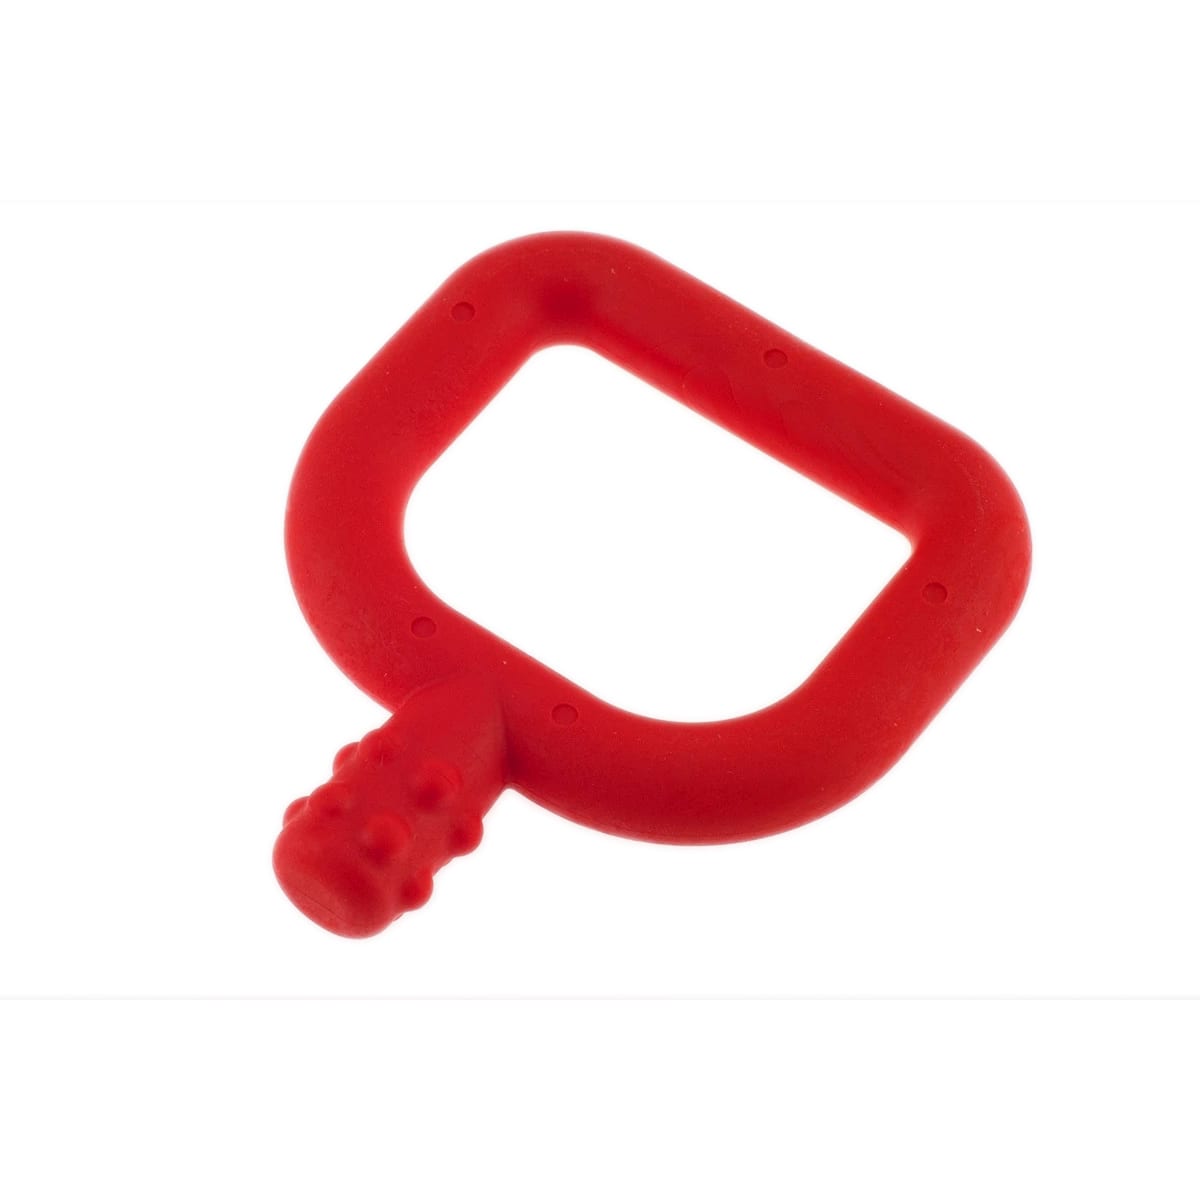 MINI CHEWY - RED KNOBBY - STAGE 2 TEETHER